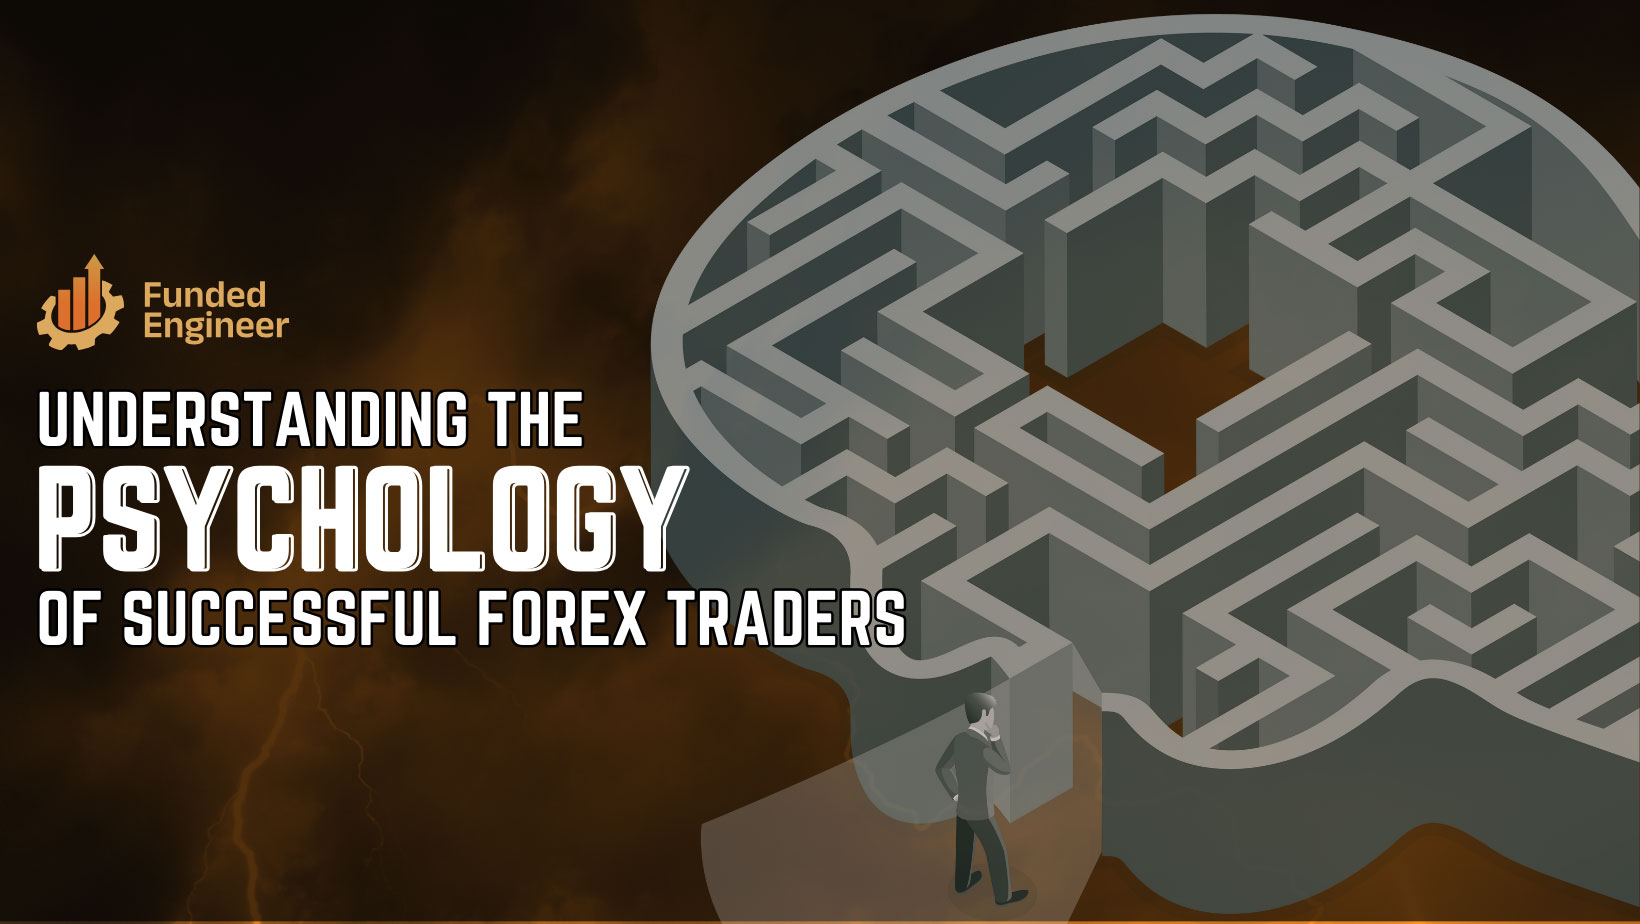 cover image for blog "Understanding the Psychology of Successful Forex Traders"